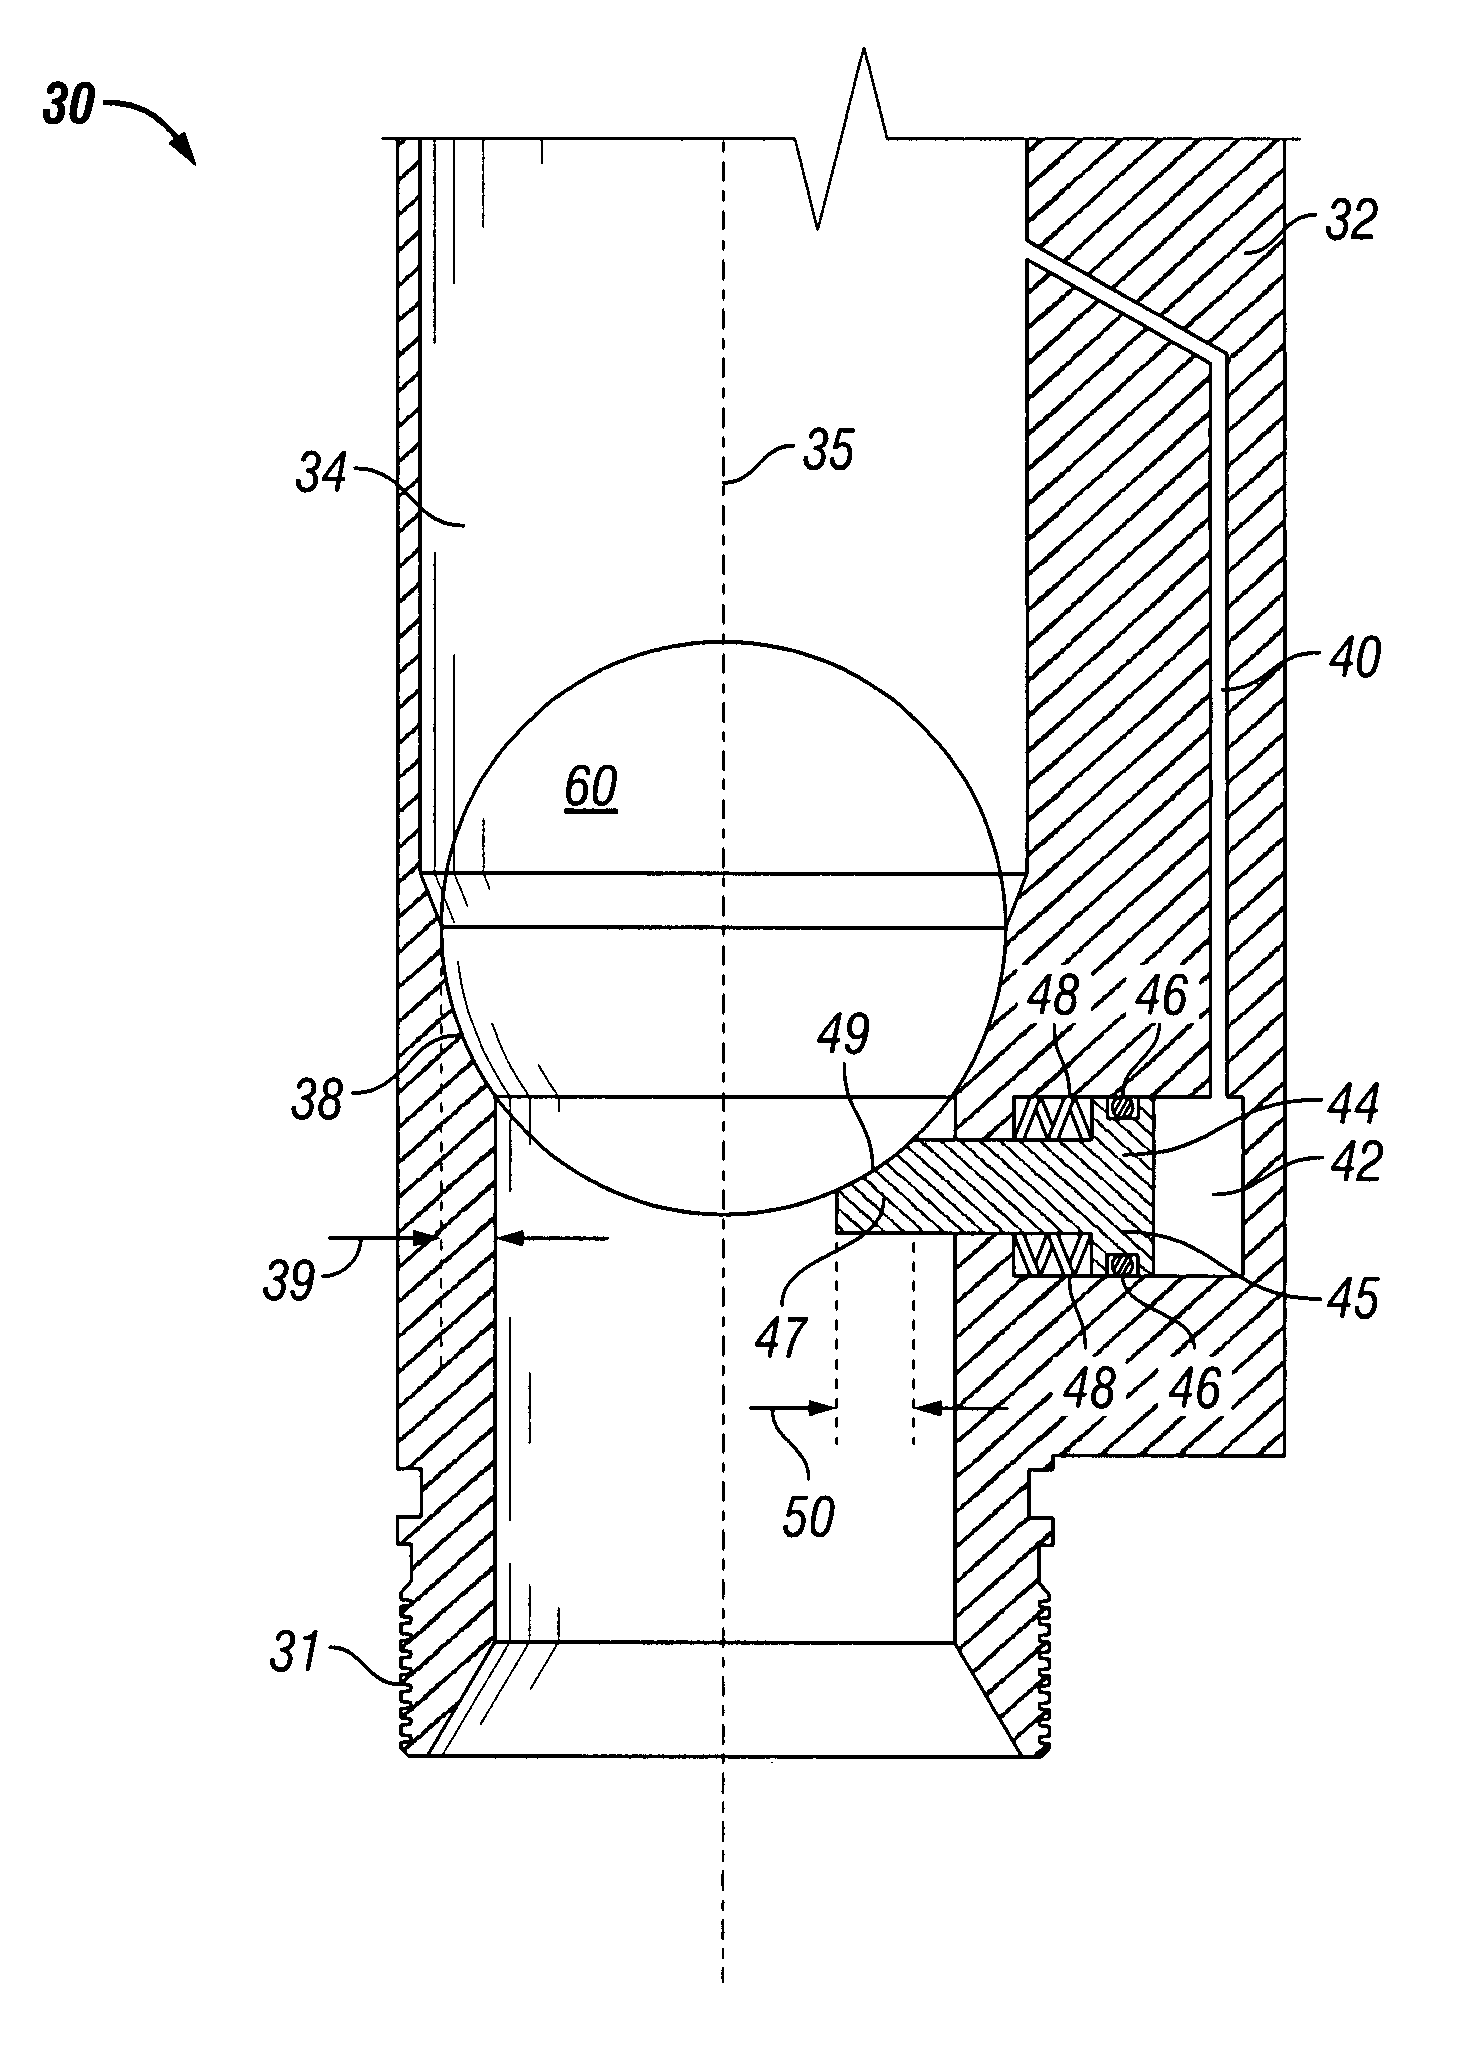 Ball seat having fluid activated ball support